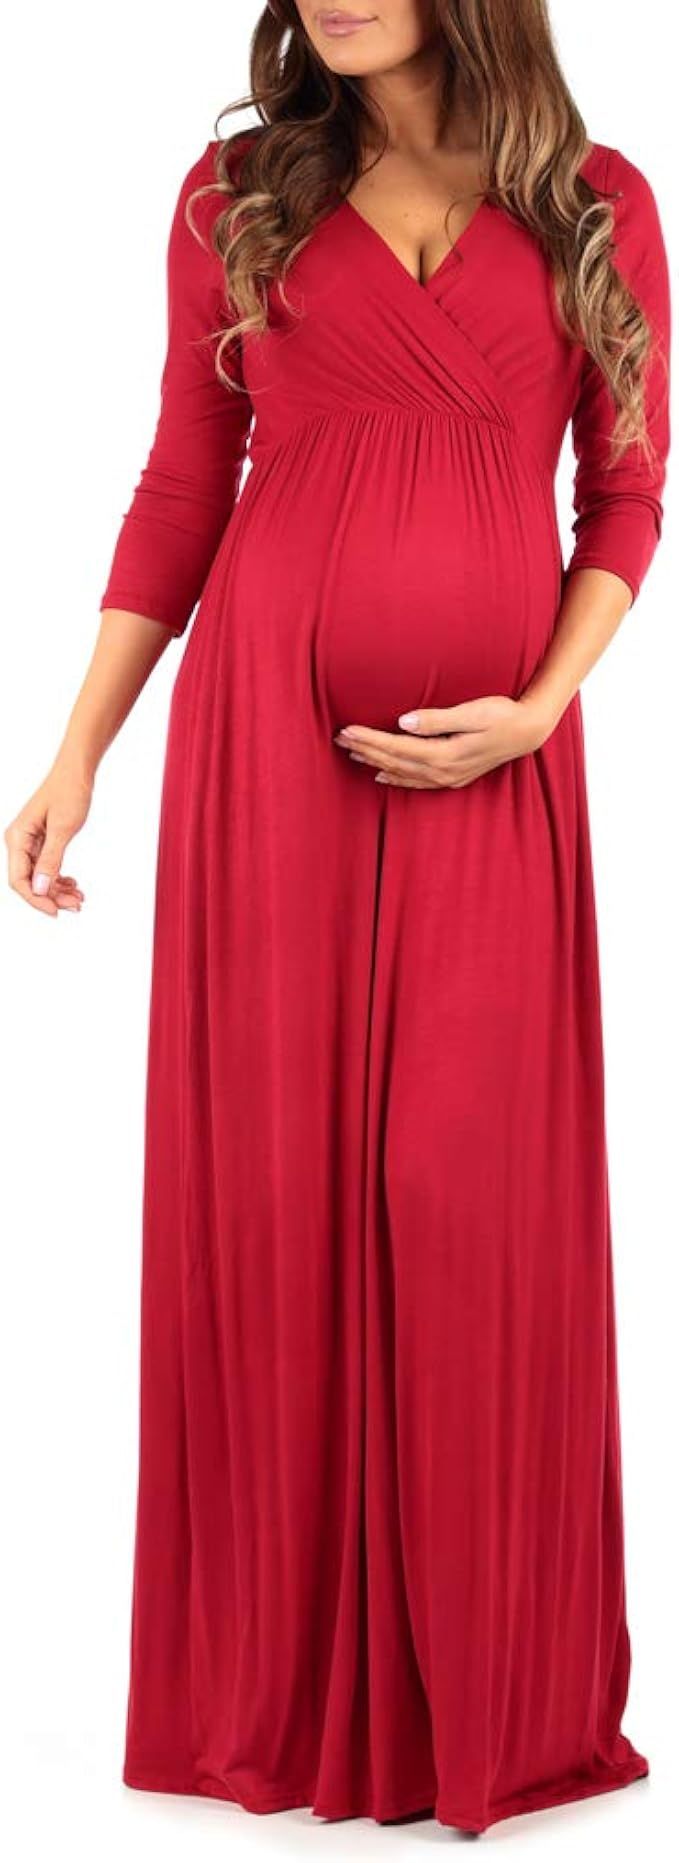 Mother Bee Maternity 3/4 Sleeve Ruched Maternity Dress W/Empire Waist for Baby Showers or Casual ... | Amazon (US)